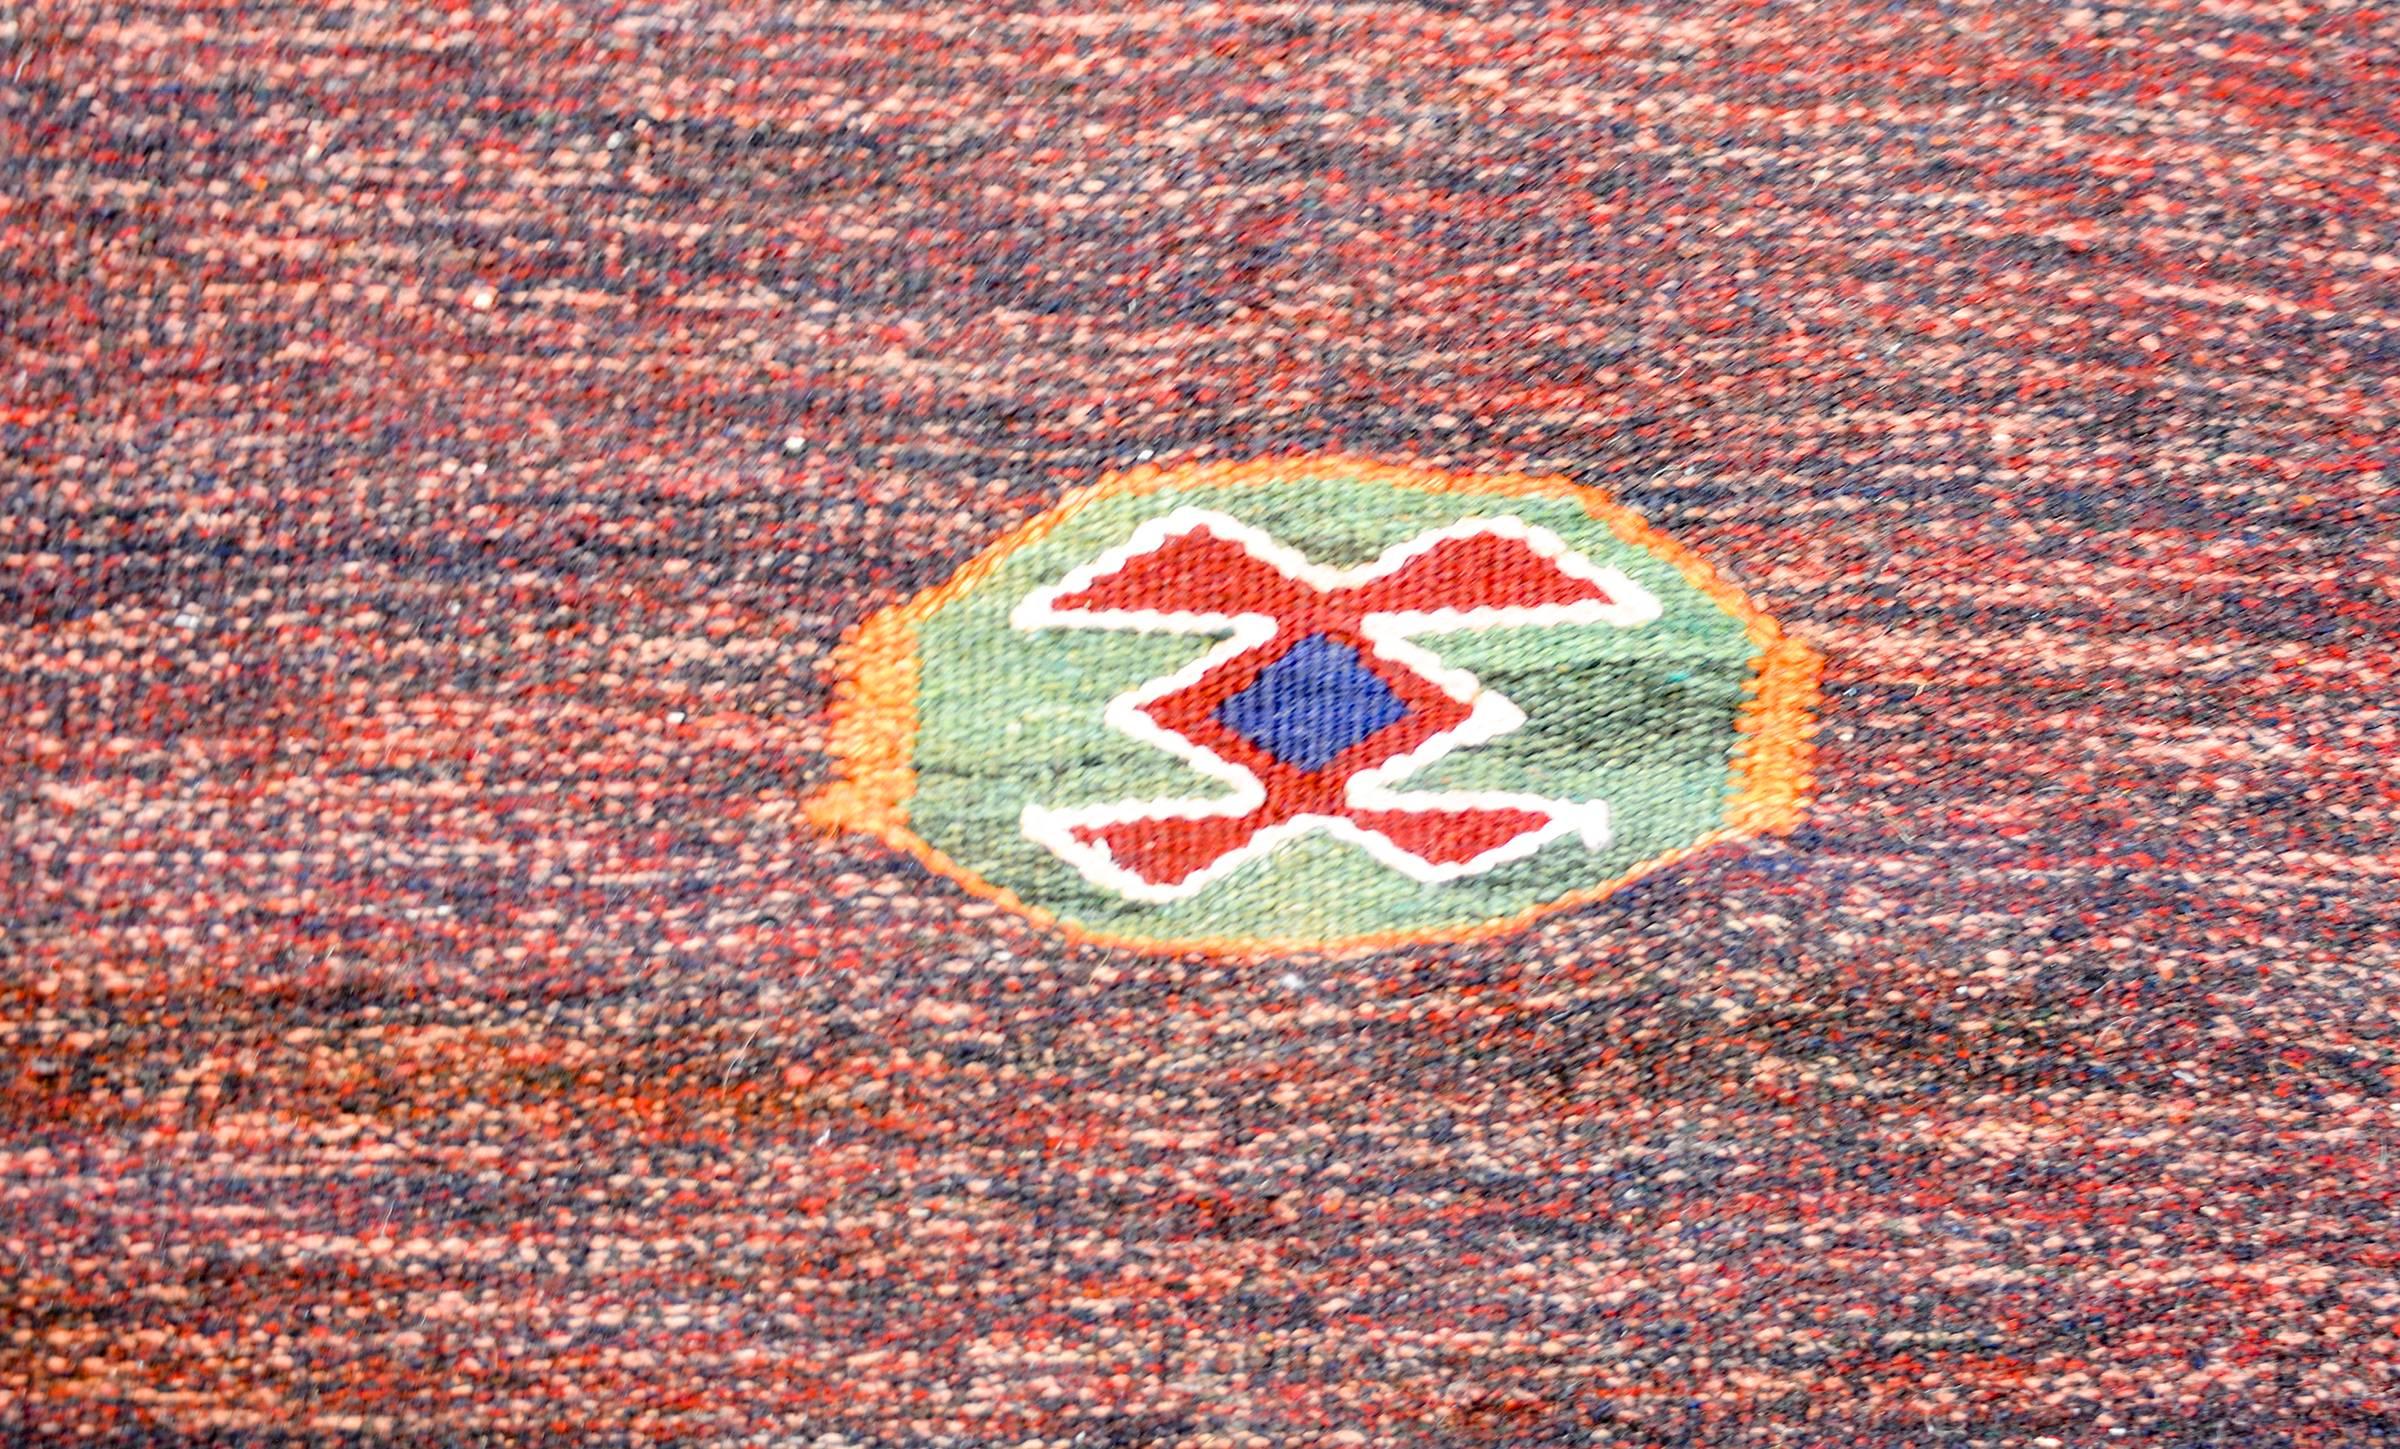 An incredible vintage Persian Gabbeh Kilim rug woven in crimson and indigo wool with an asymmetrical design containing two white stripes and central stylized floral medallion.